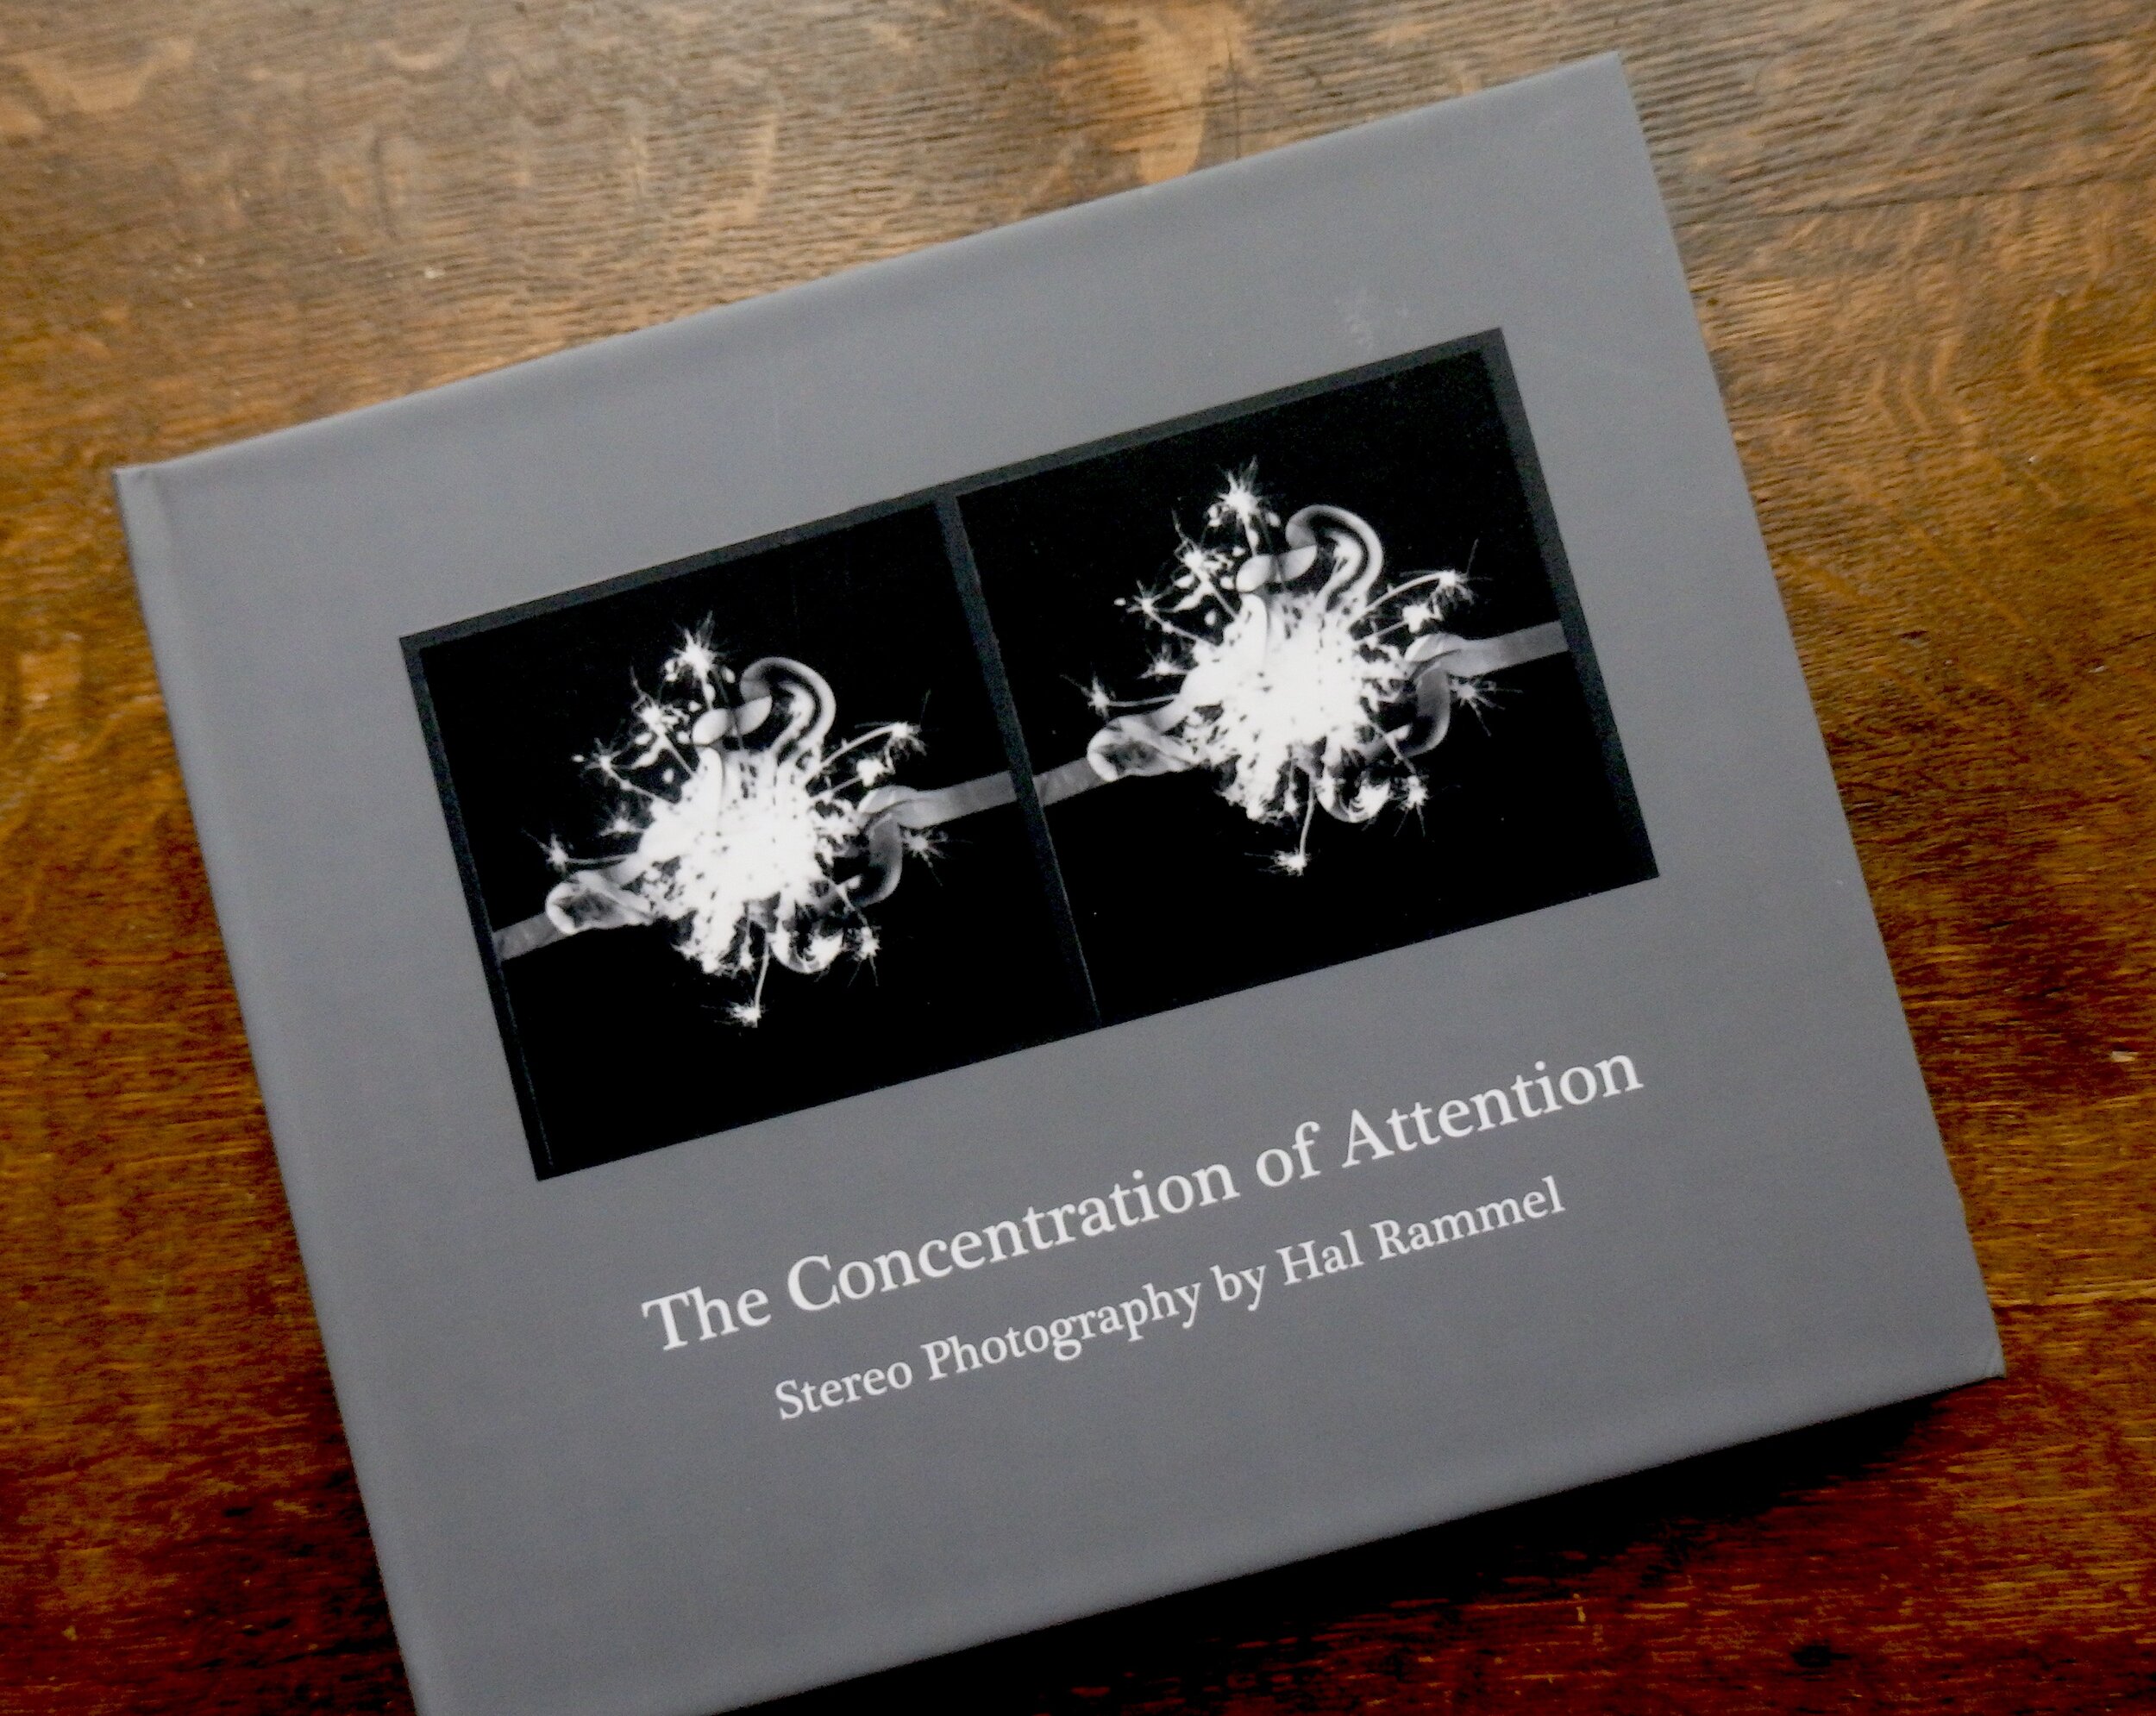 The Concentration of Attention